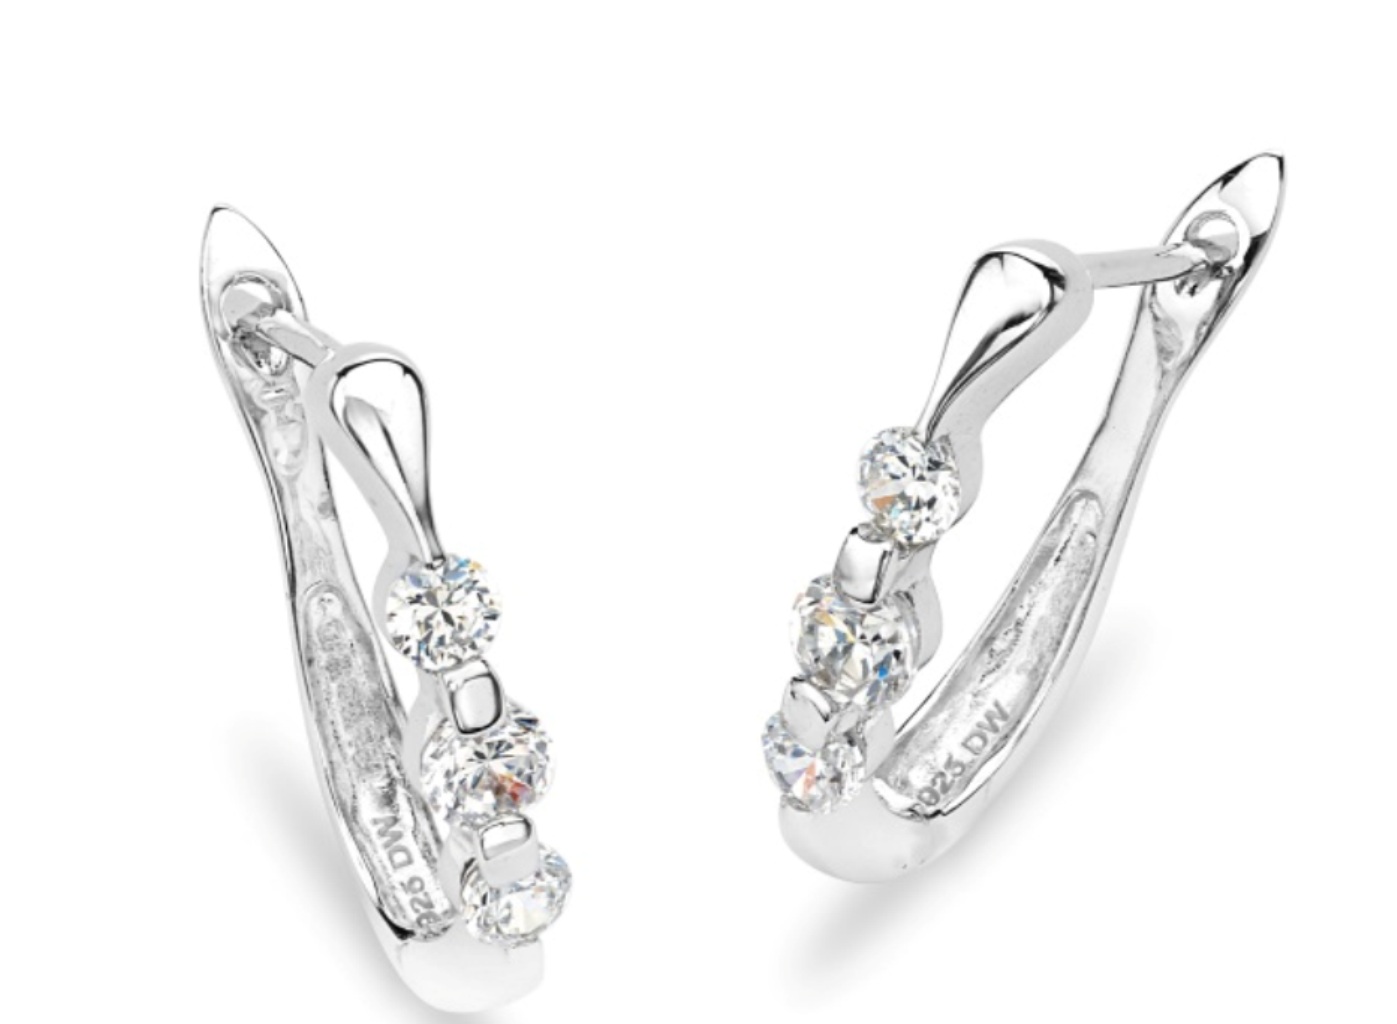 Petite Round CZ Stud Earrings, Rhodium Plated Sterling Silver. 